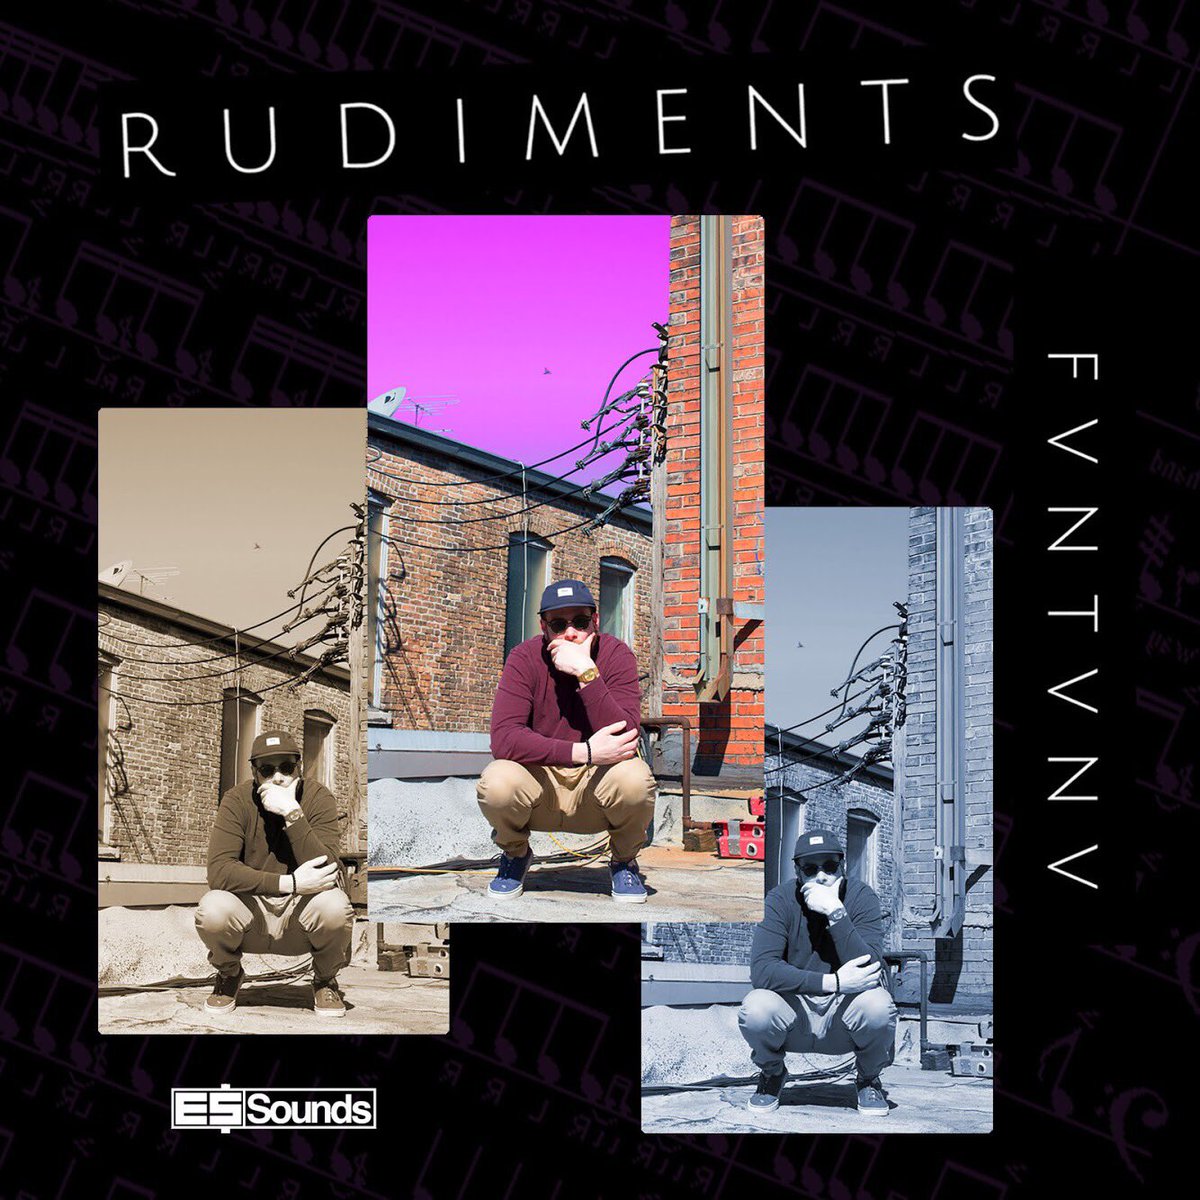 MY NEW ALBUM ‘RUDIMENTS’ OUT NOW 🔊🔊🔊

Link: 👇🏼👇🏼👇🏼
soundcloud.com/fvntvnv11/sets…

Releasing in online stores and streaming services in the next few days 🤙🏼

THANK YOU SO MUCH TO EVERYONE LISTENING & SUPPORTING 🙏🏼👏🏼 
#EastsideSound #EastsidersMusic @EastSidersMusic